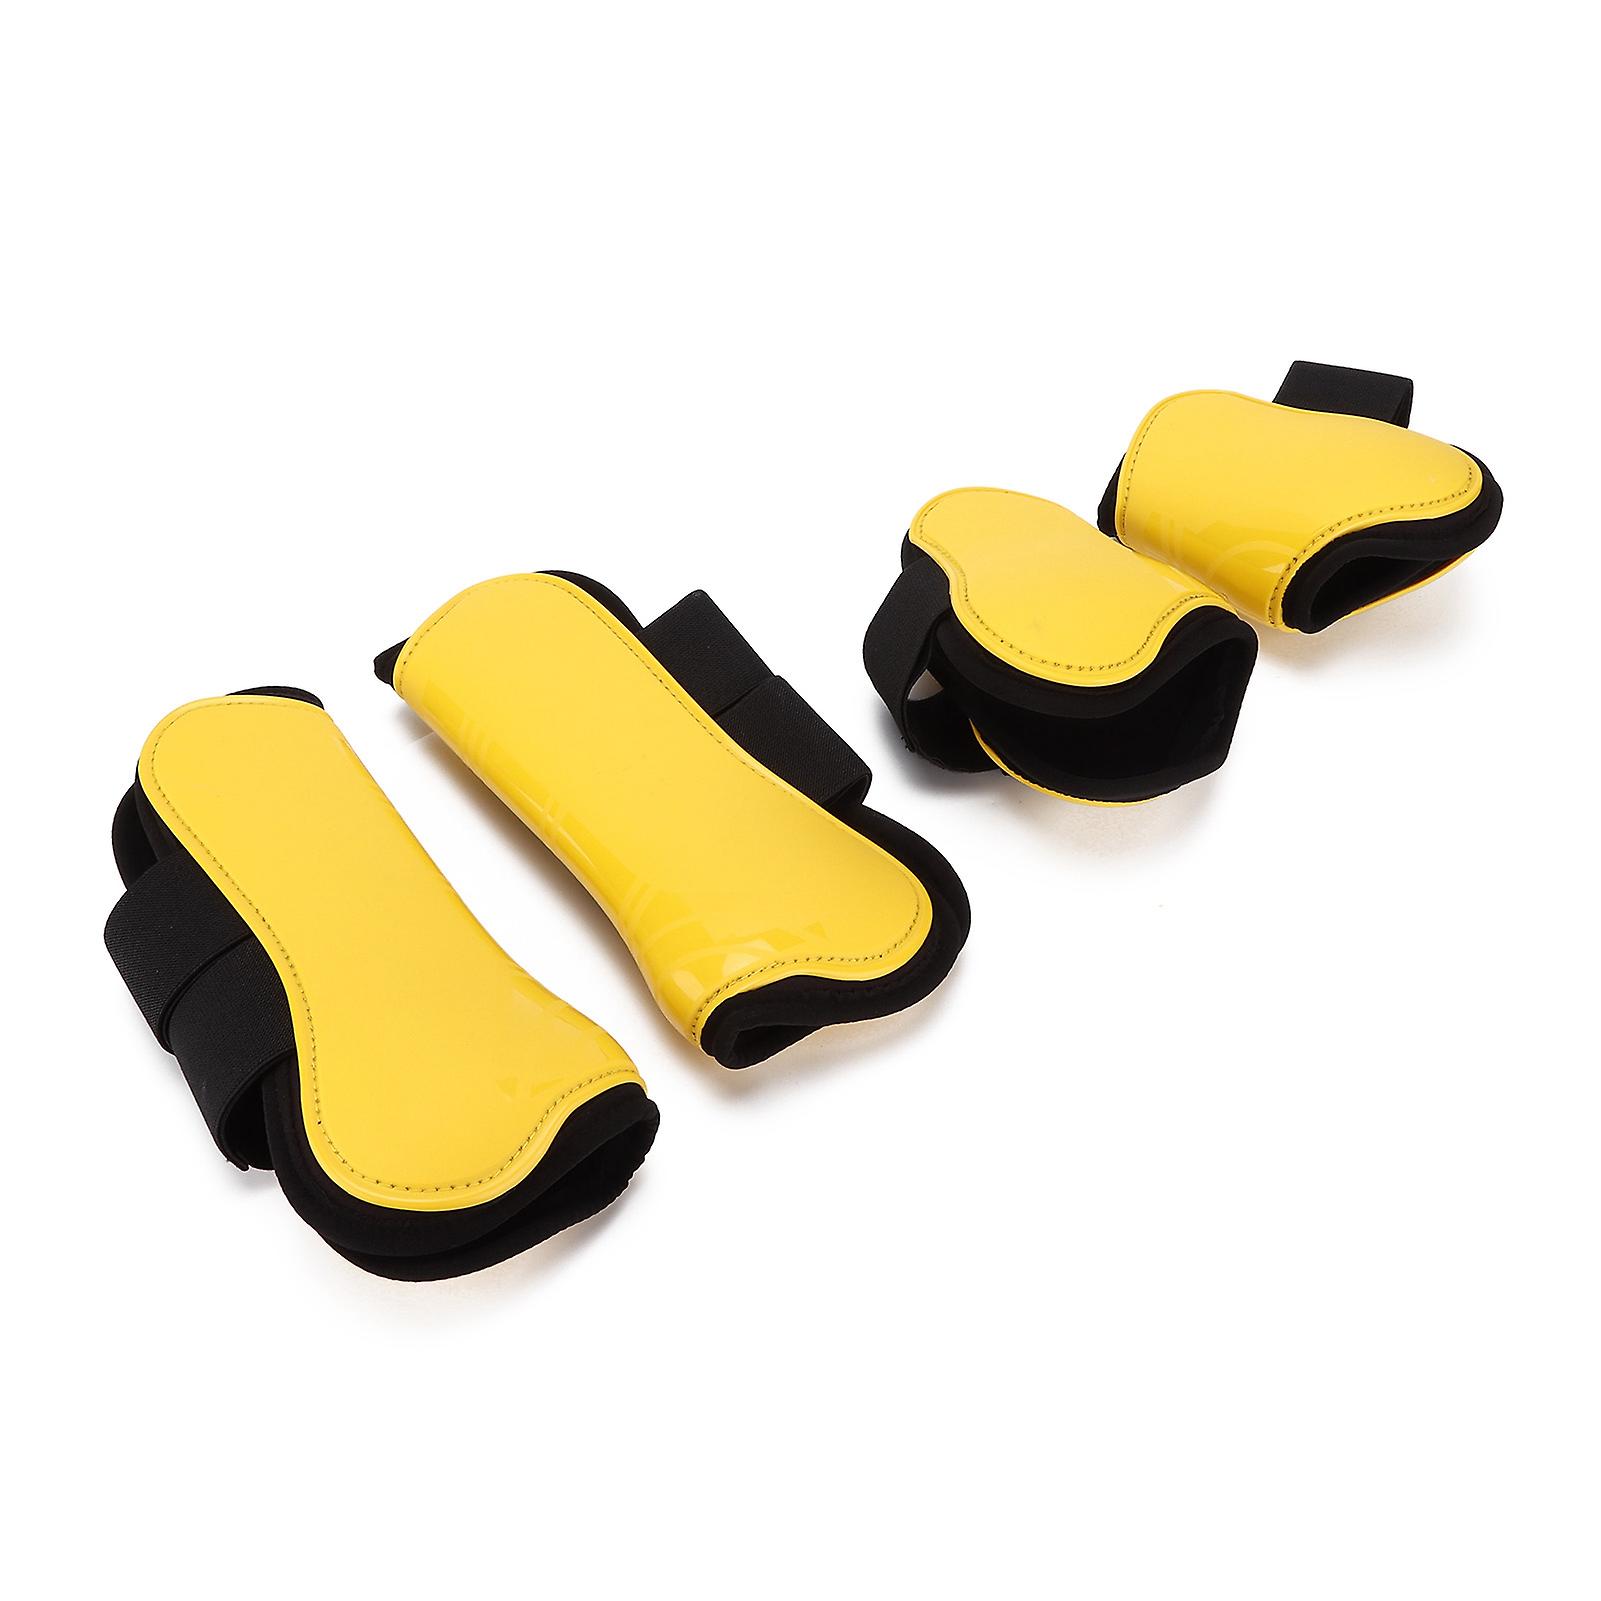 Horse Tendon Boots Set Of 4 Pu Shell Guard Boots For Riding Shock Absorbing Jumping Protectionyellow Xl